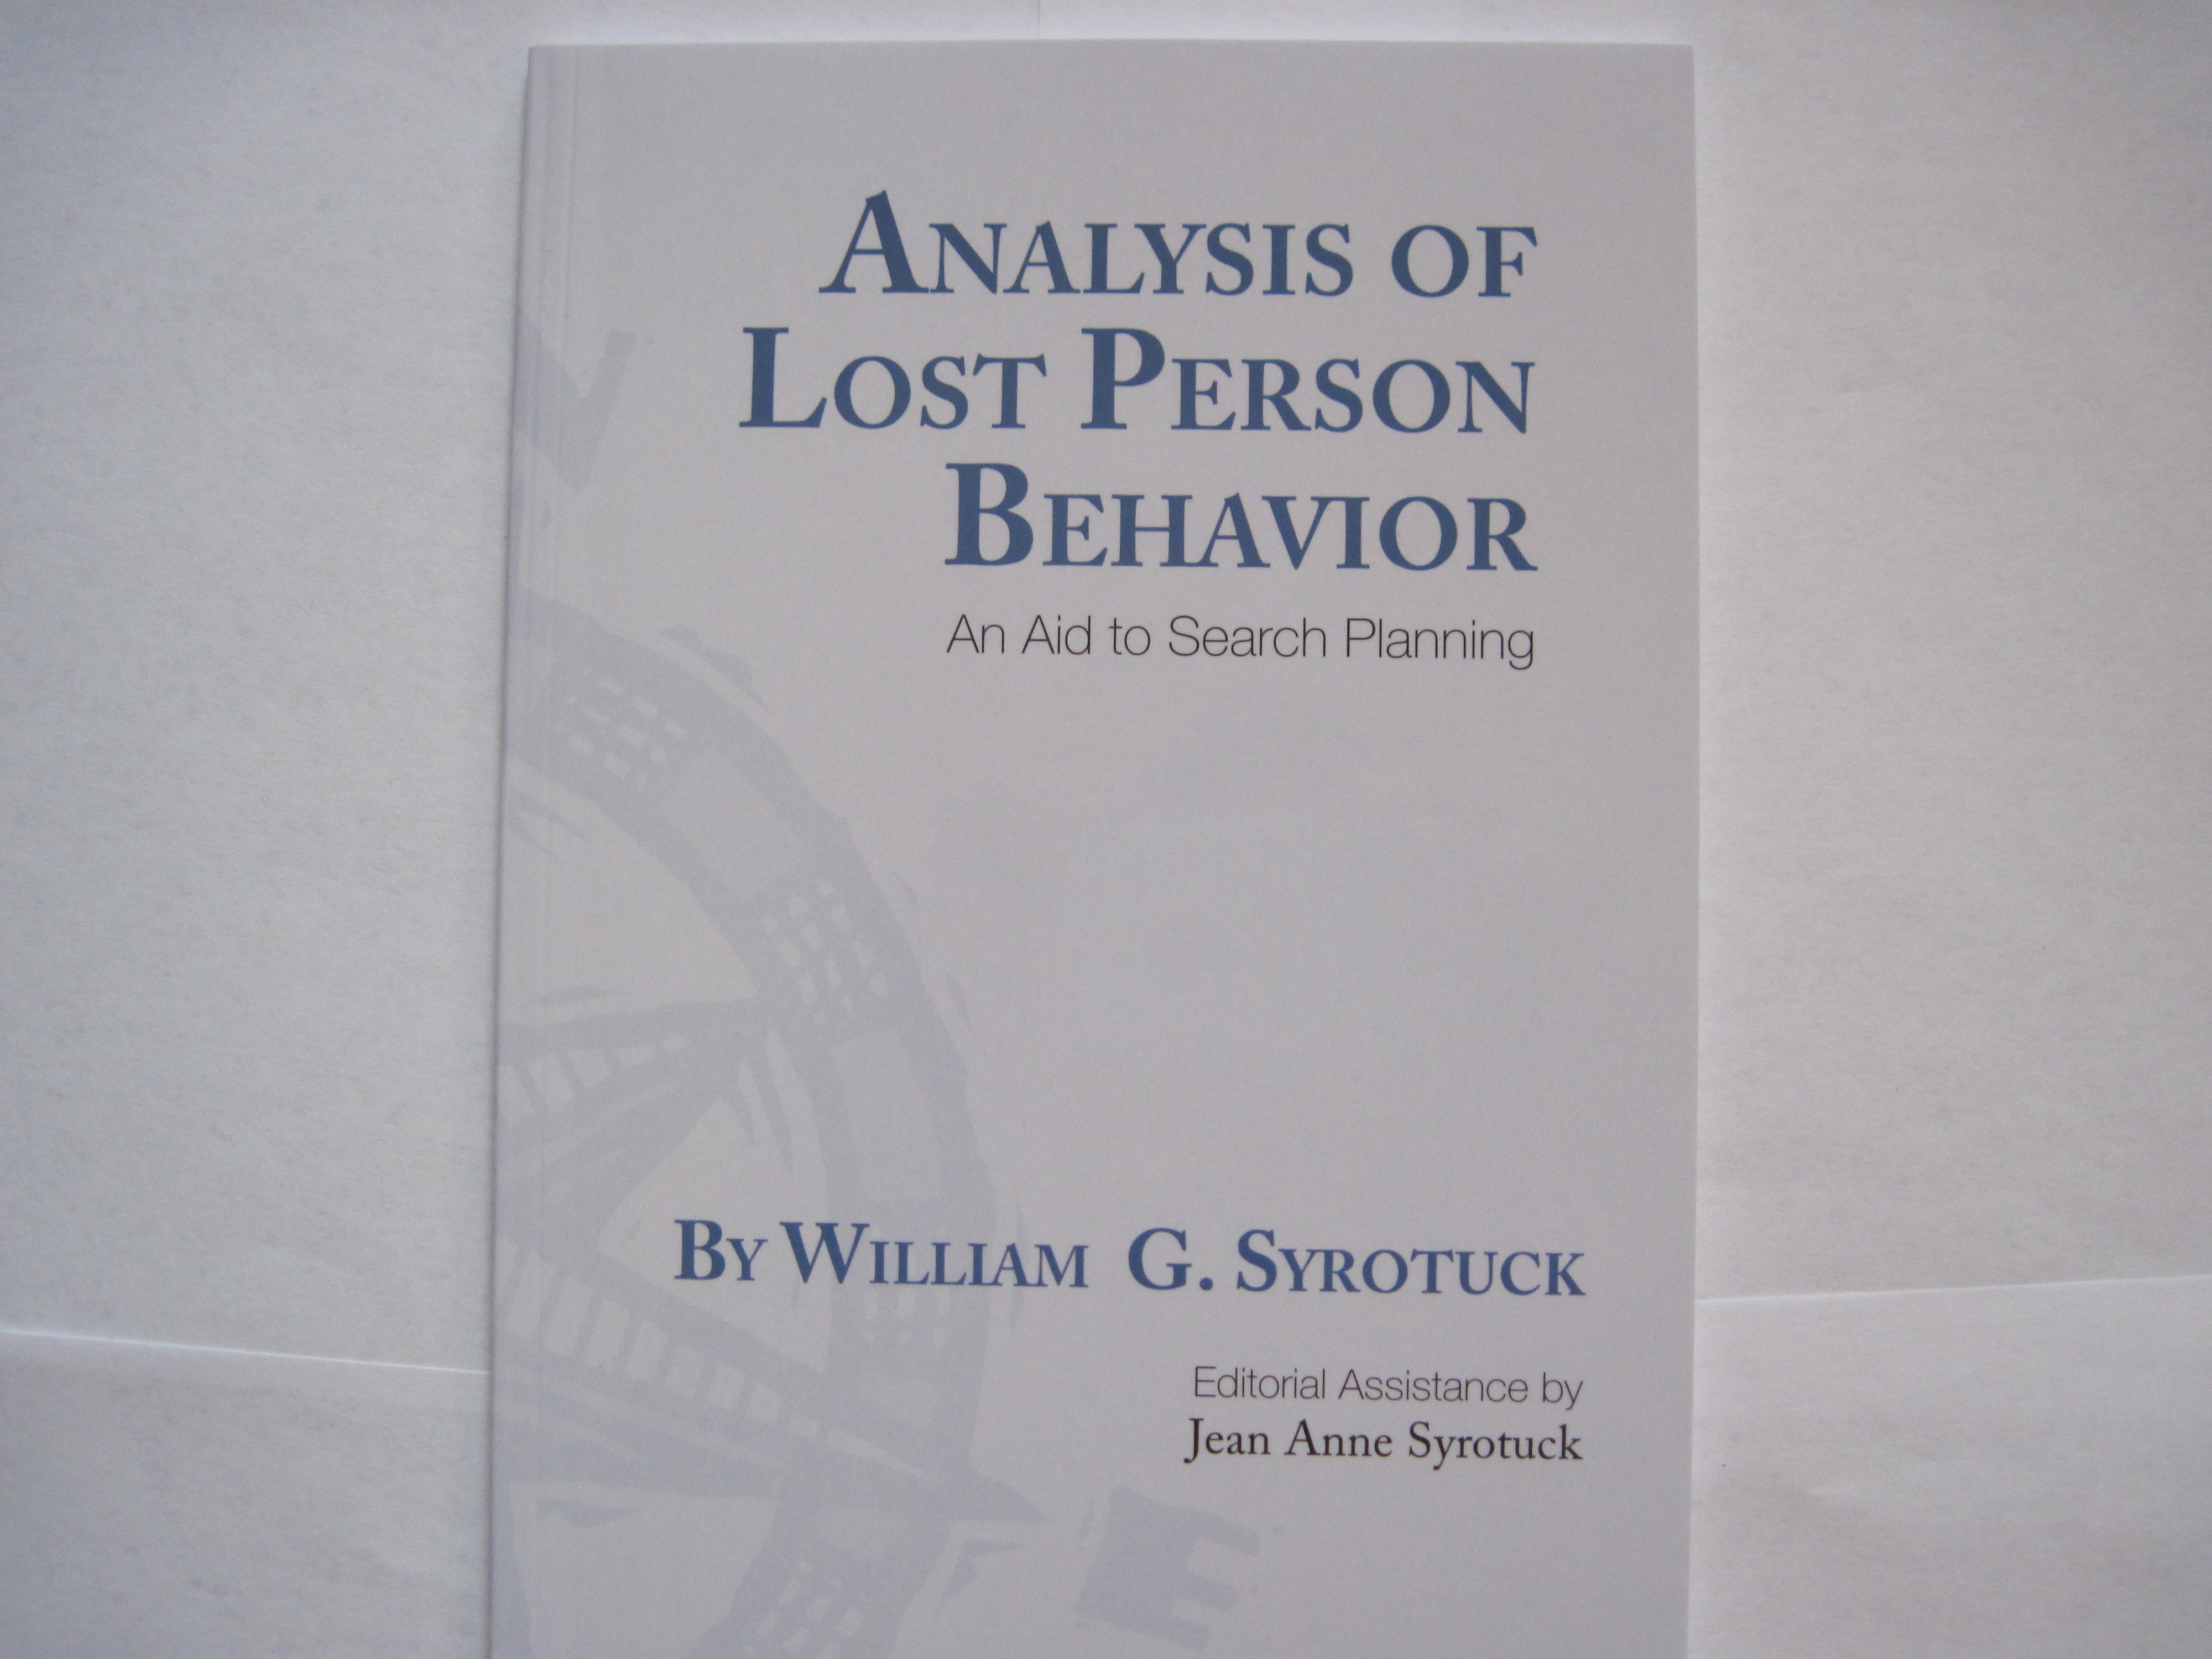 Analysis of Lost Person Behavior